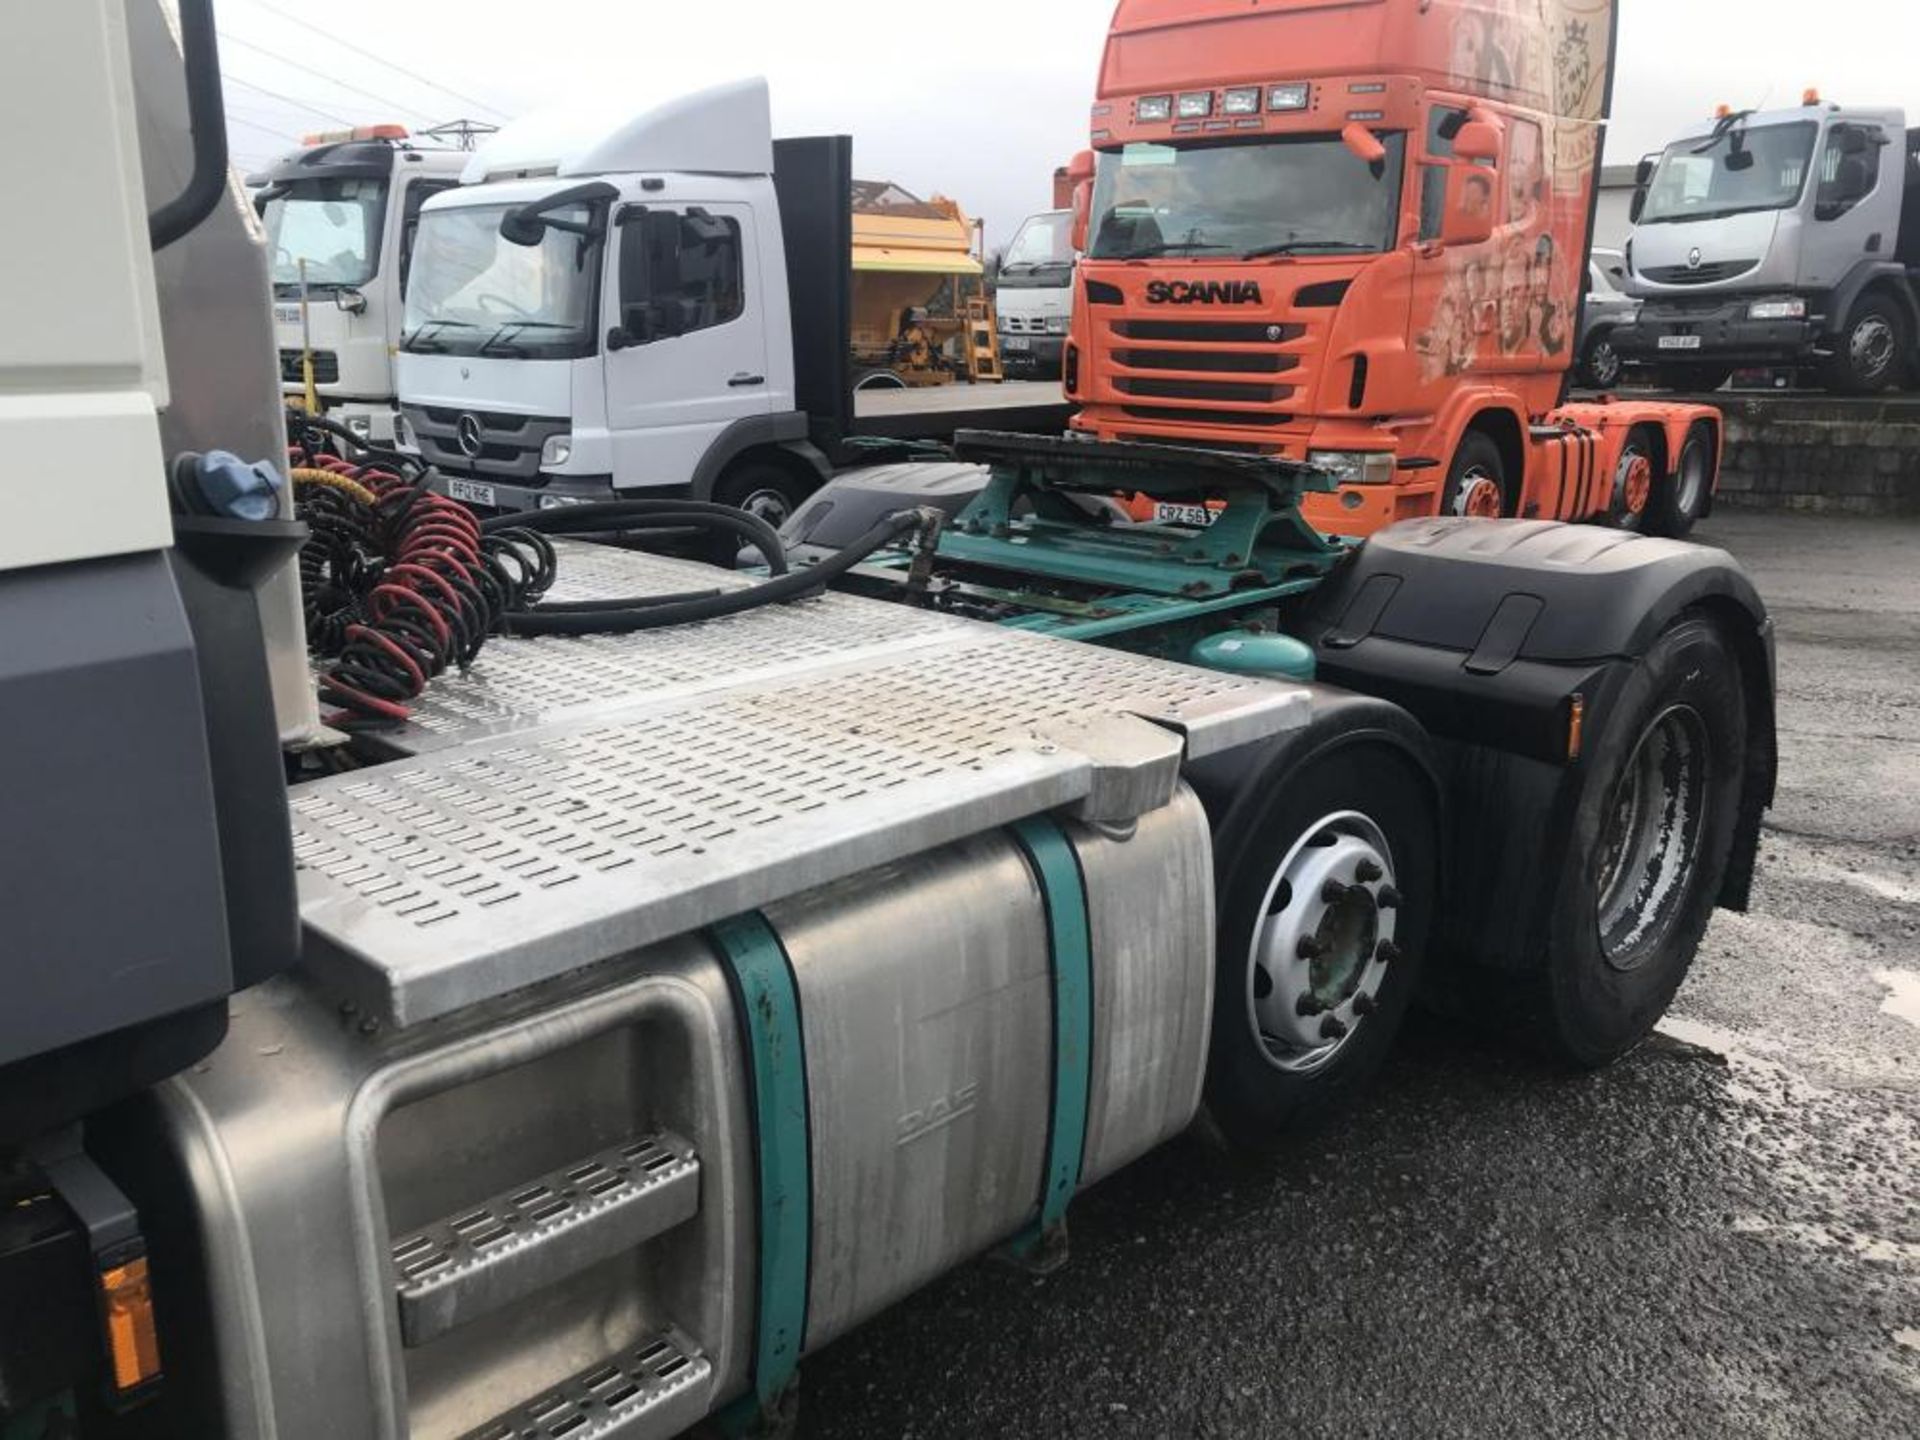 2014/14 REG DAF XF 105.460 6X2 TRACTOR UNIT MANUAL GEARBOX TIPPING GEAR EURO 6 *PLUS VAT* - Image 11 of 12